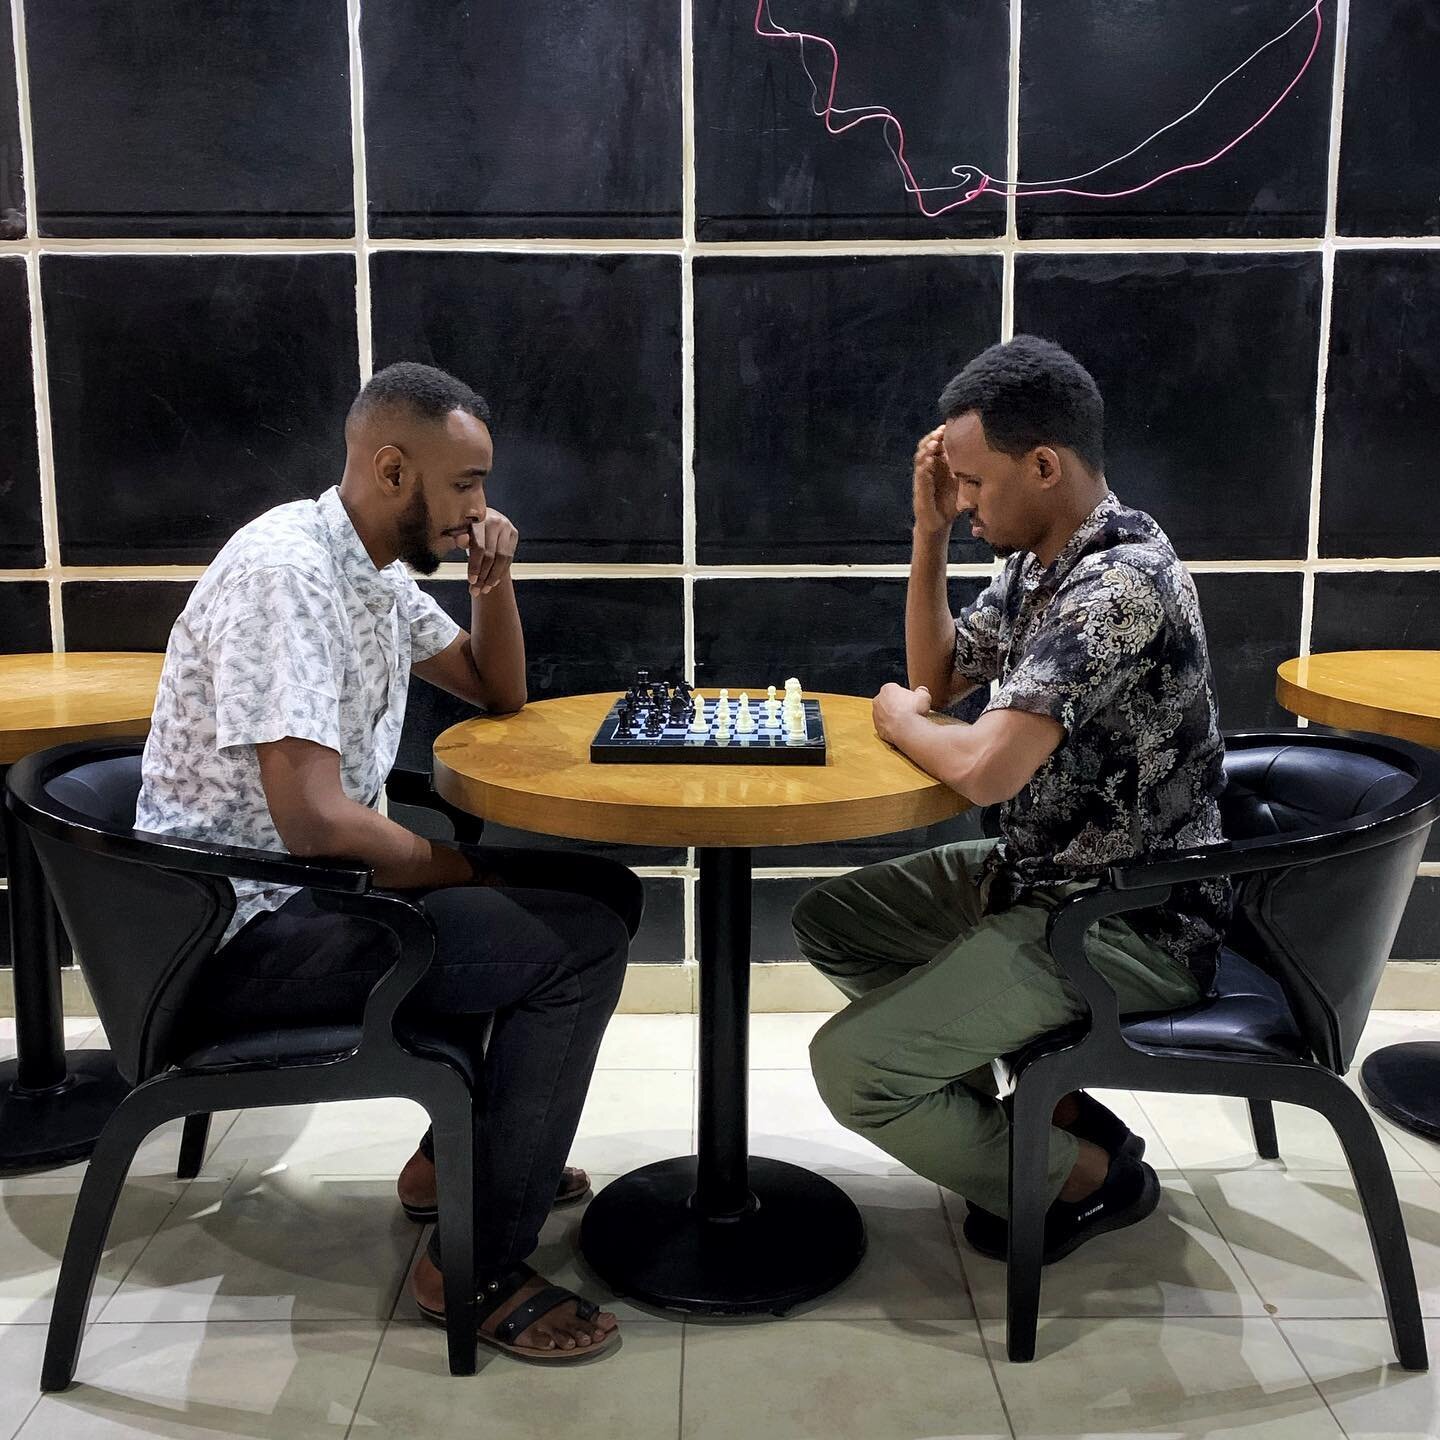 Friends playing chess at a game center in #Hargeisa.
Photo by Mustafa Saeed @themustafasaeed #MustafaSaeed 

#EverydayAfrica #EverydayHornOfAfrica #EverydayEverywhere #Hargeisa #Somaliland #Somalia #GameCentre #LateGram #Chess